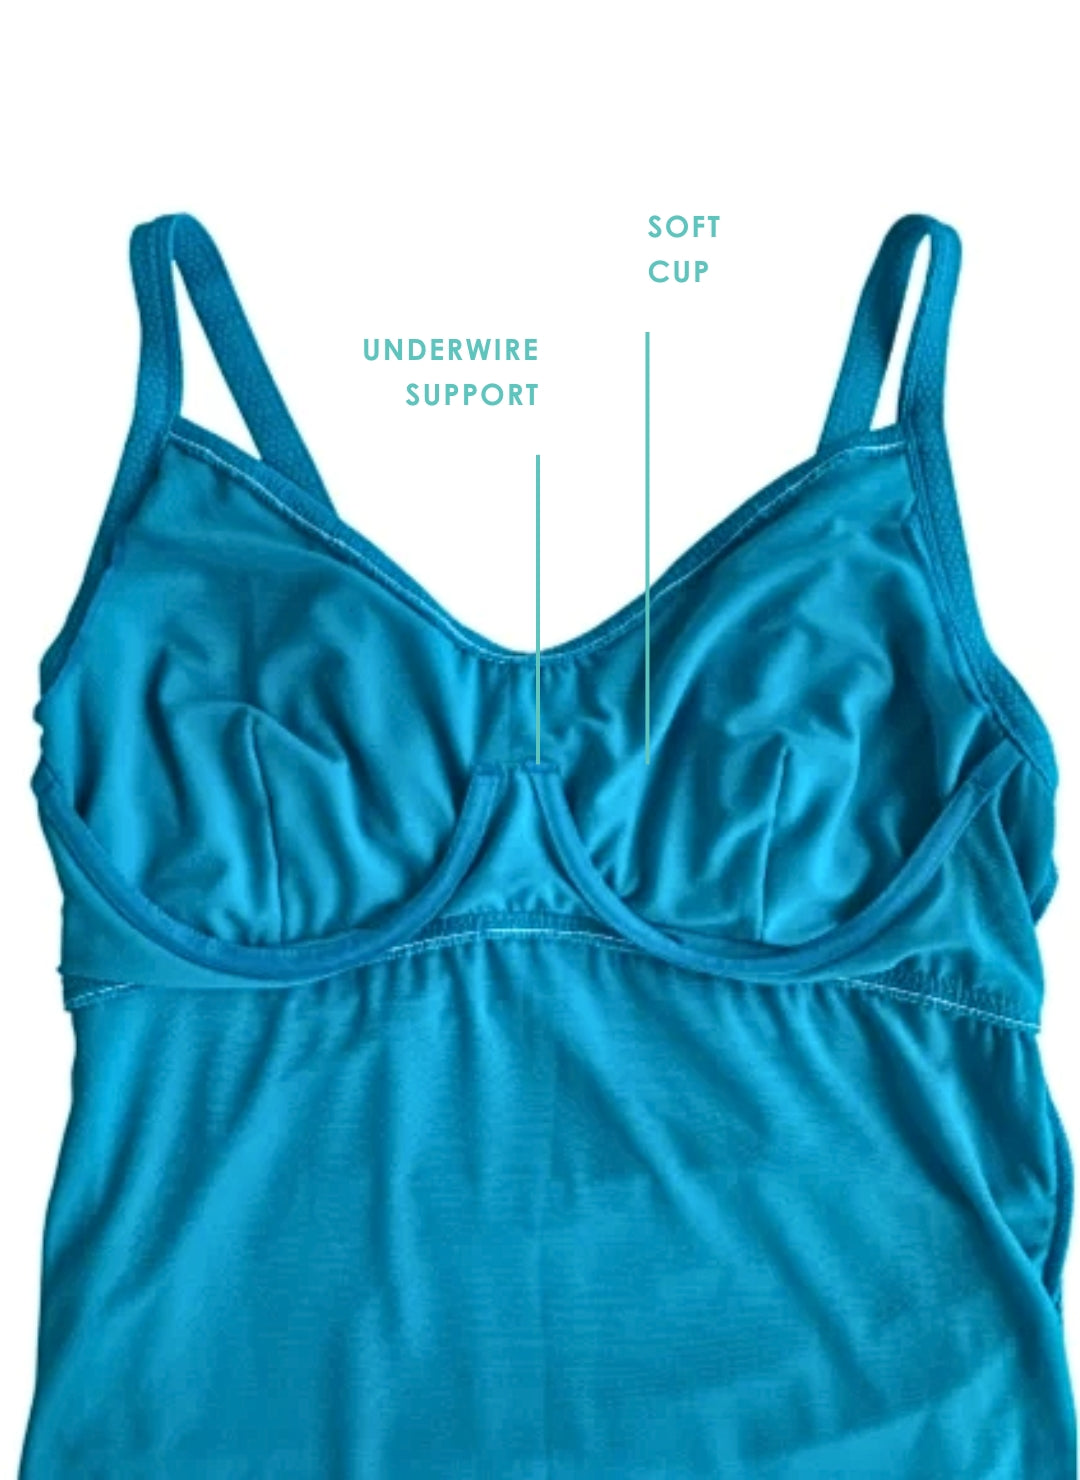 Everything You Should Know About Shelf Bras